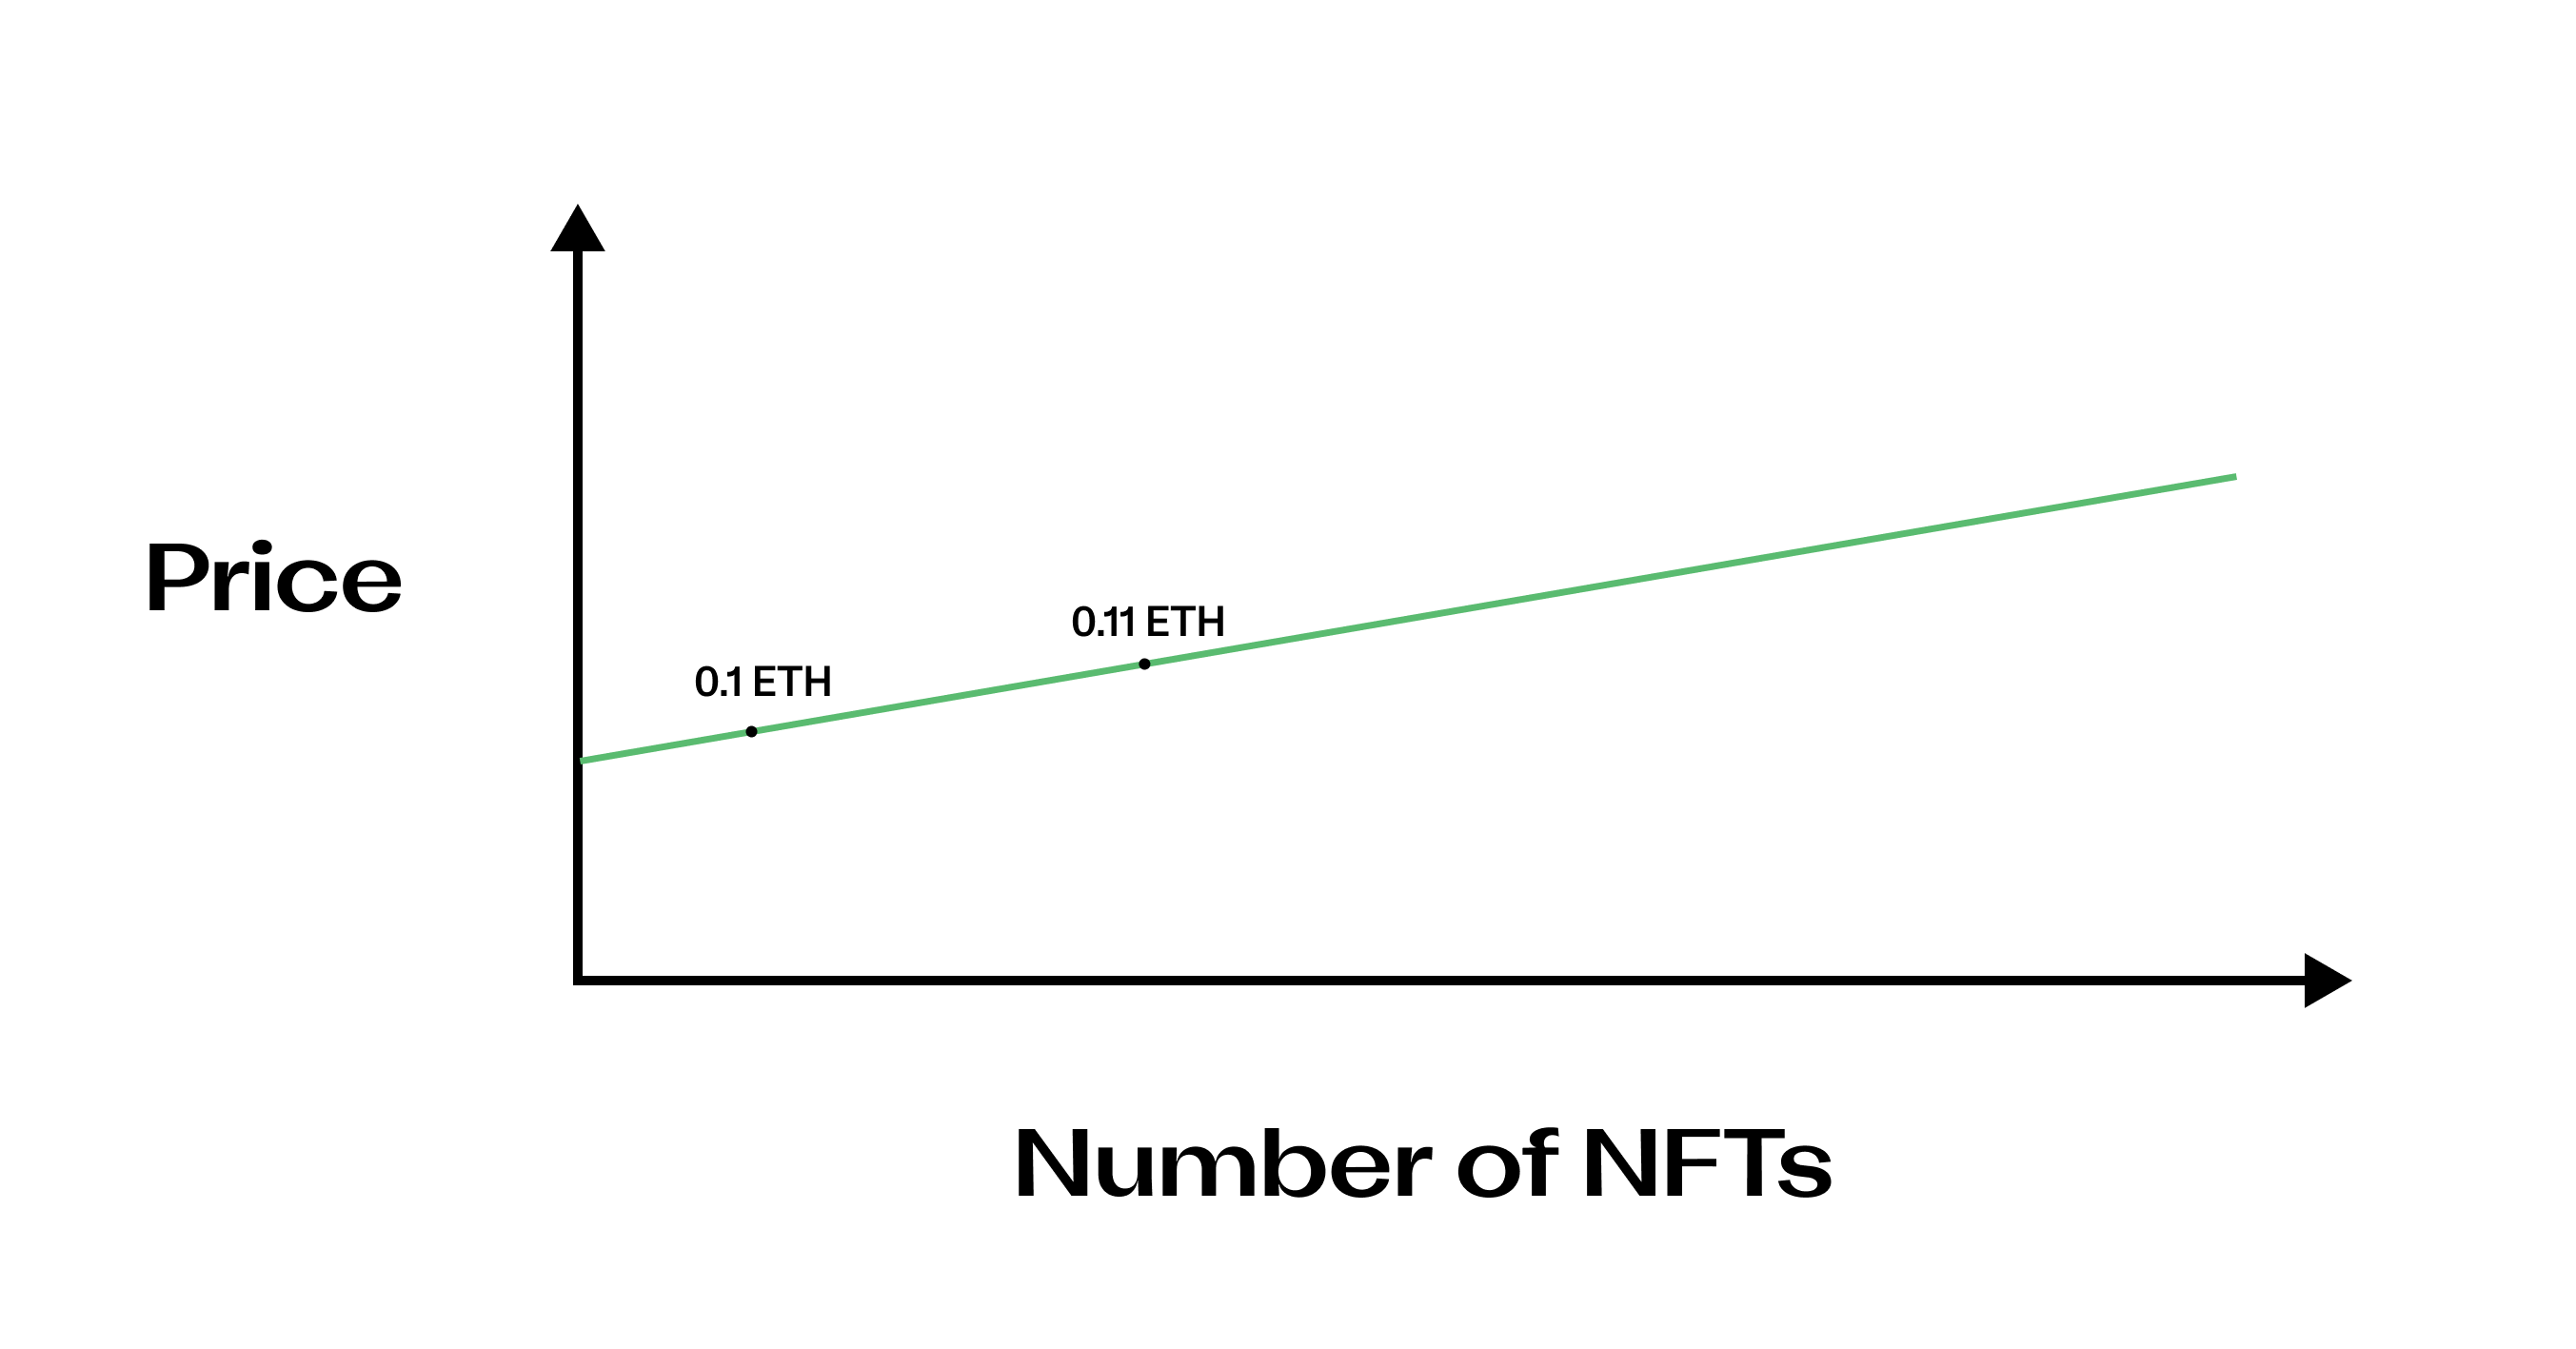 When an NFT is bought, price goes up. When one is sold, the price goes down.